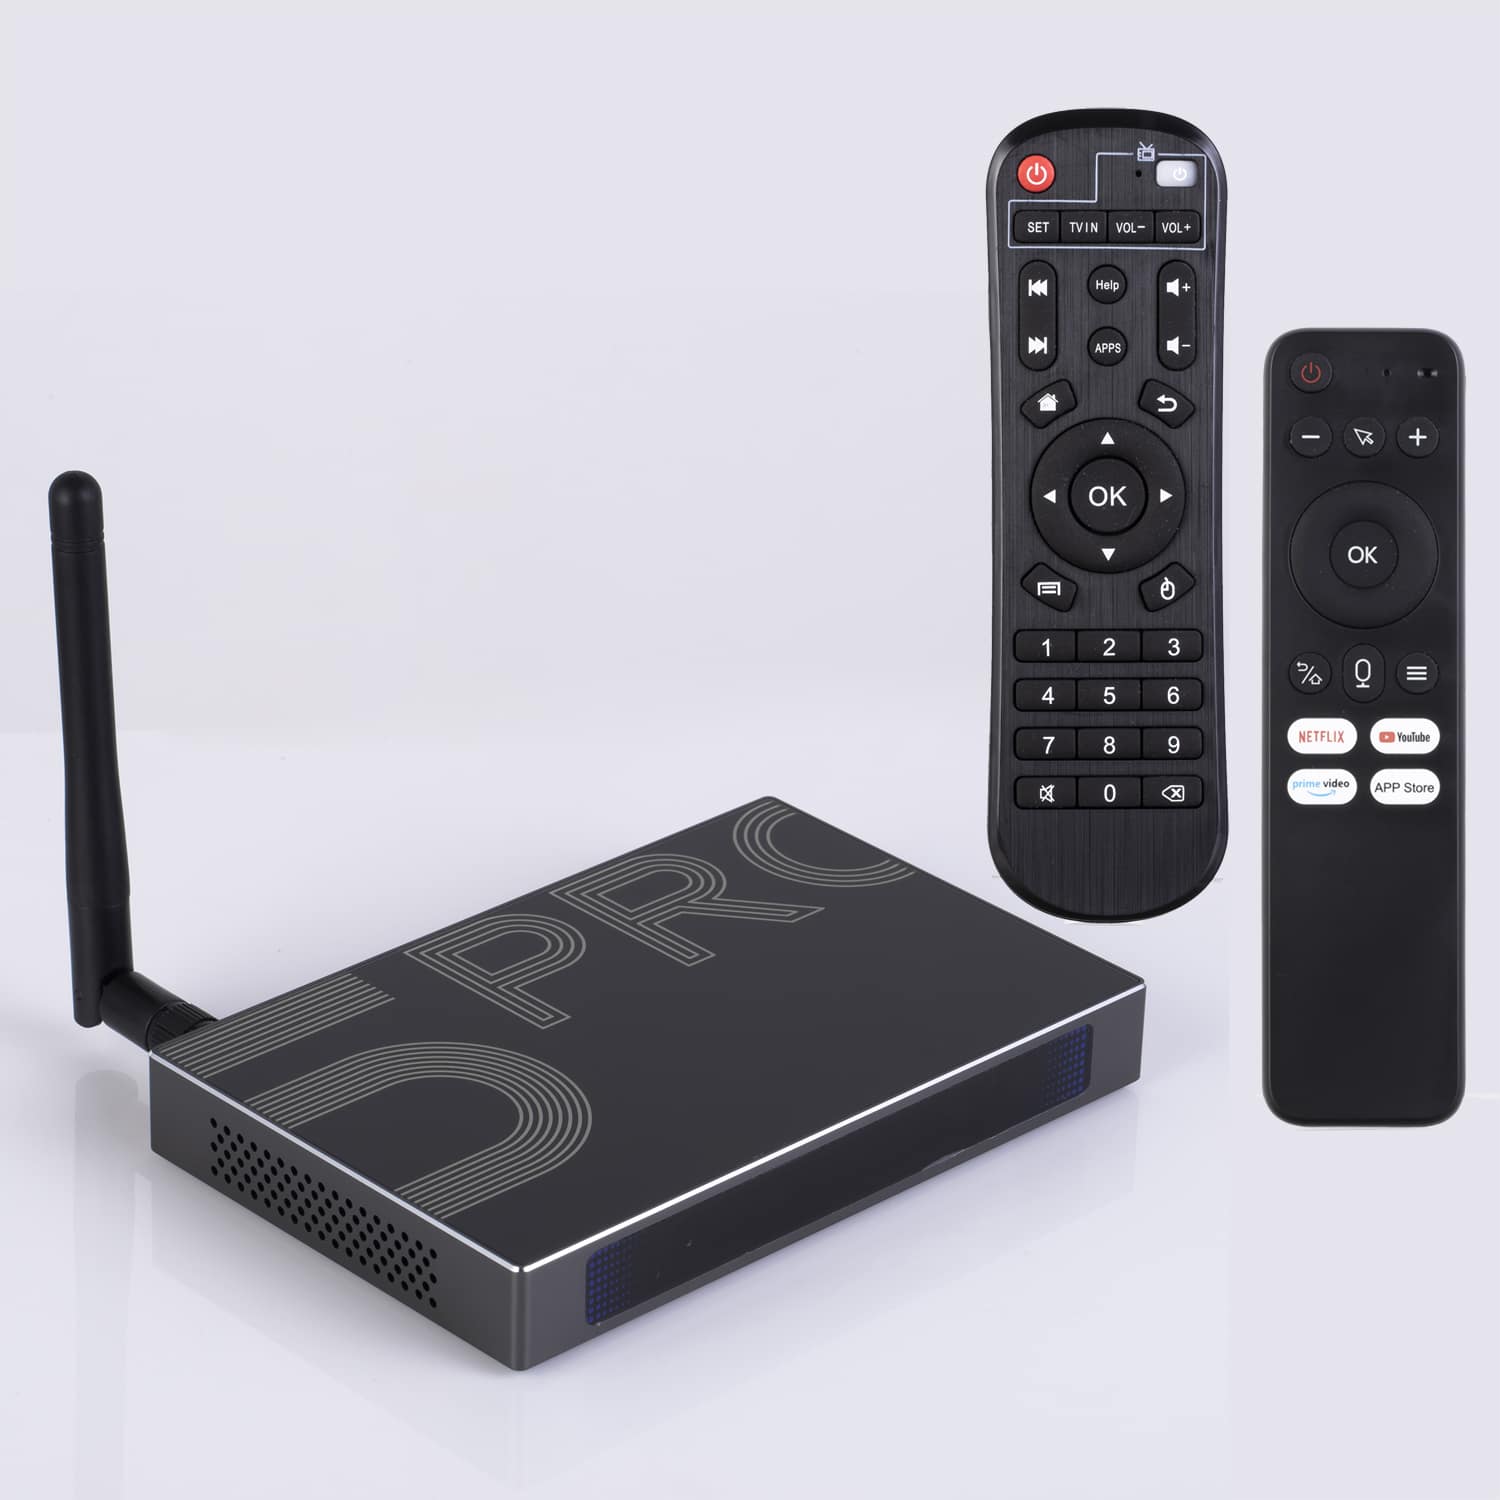 Android Smart TV Box Price in Bangladesh 2023 & 2024